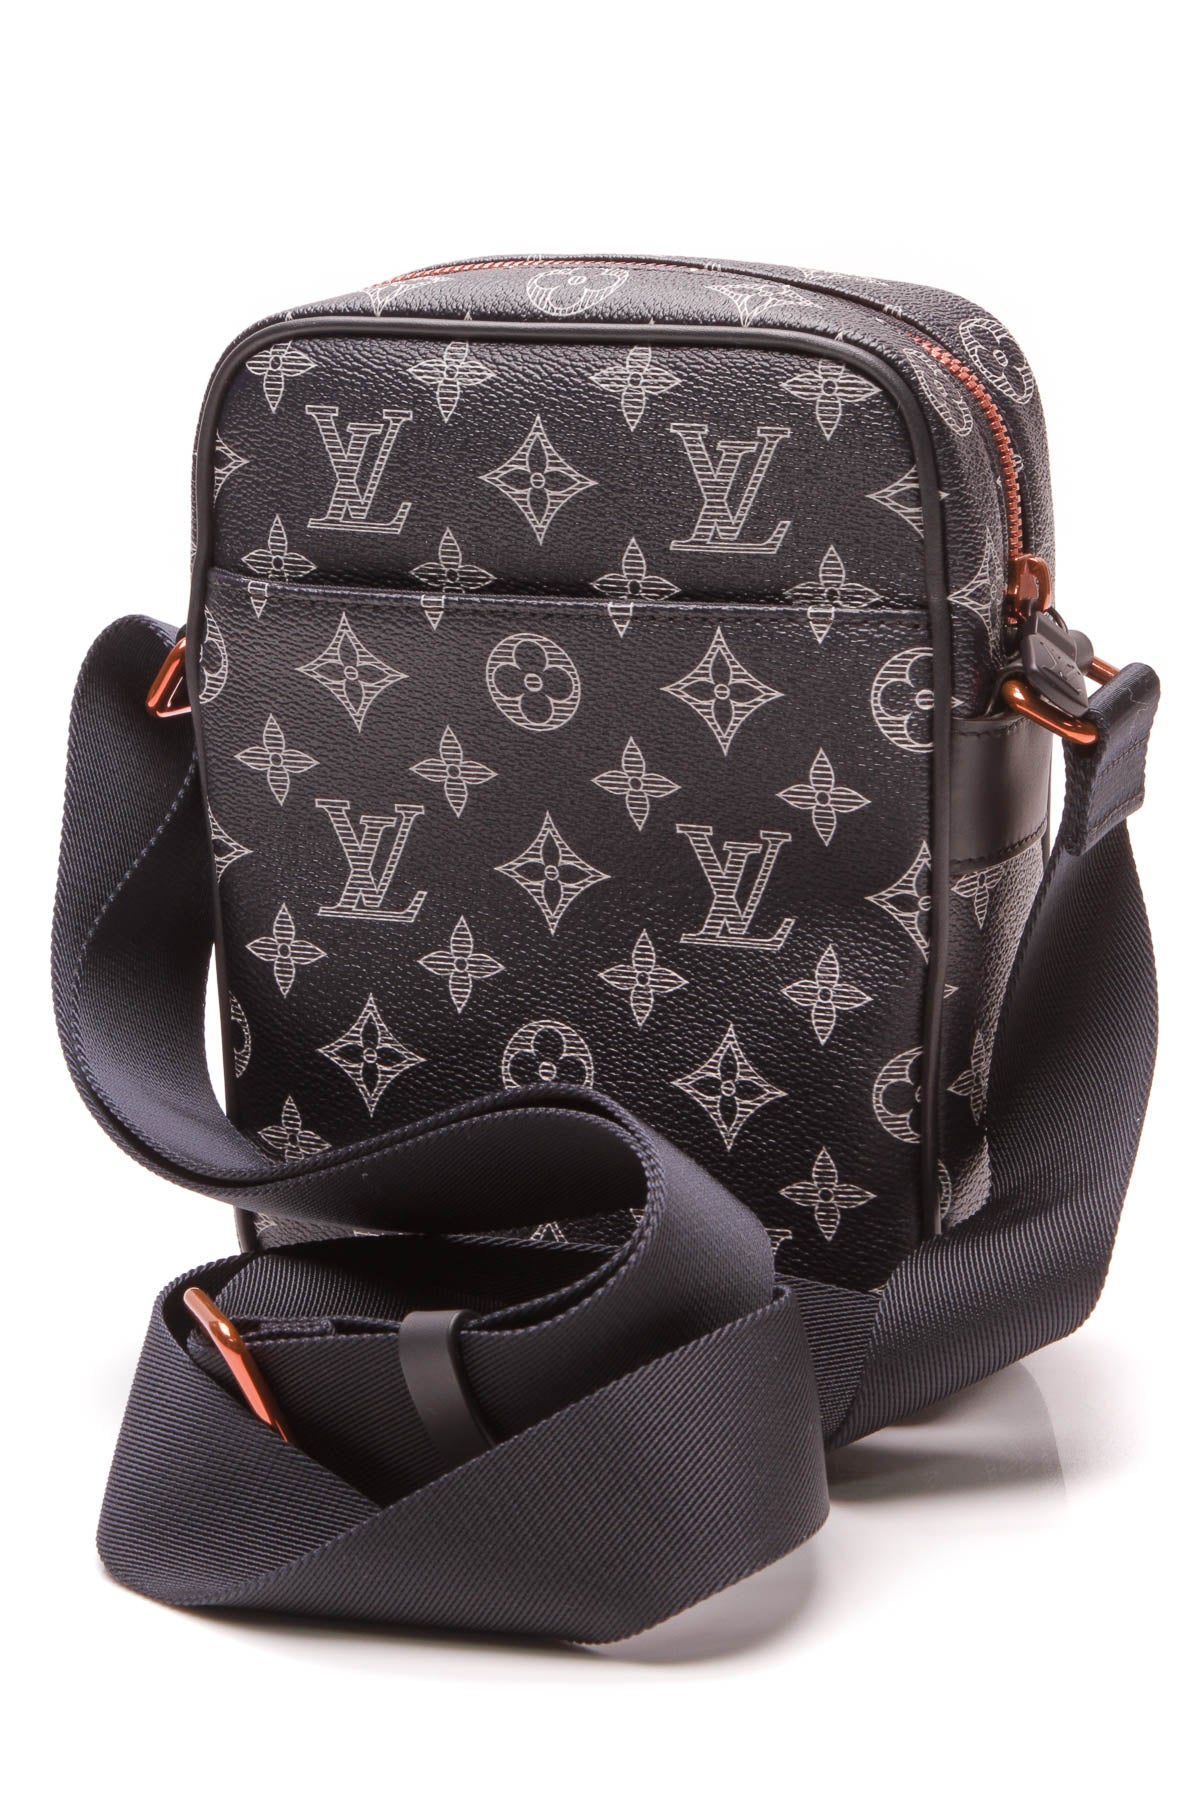 Louis Vuitton Diane Bag Makes a Comeback! Why Will It Sustain The Glory?